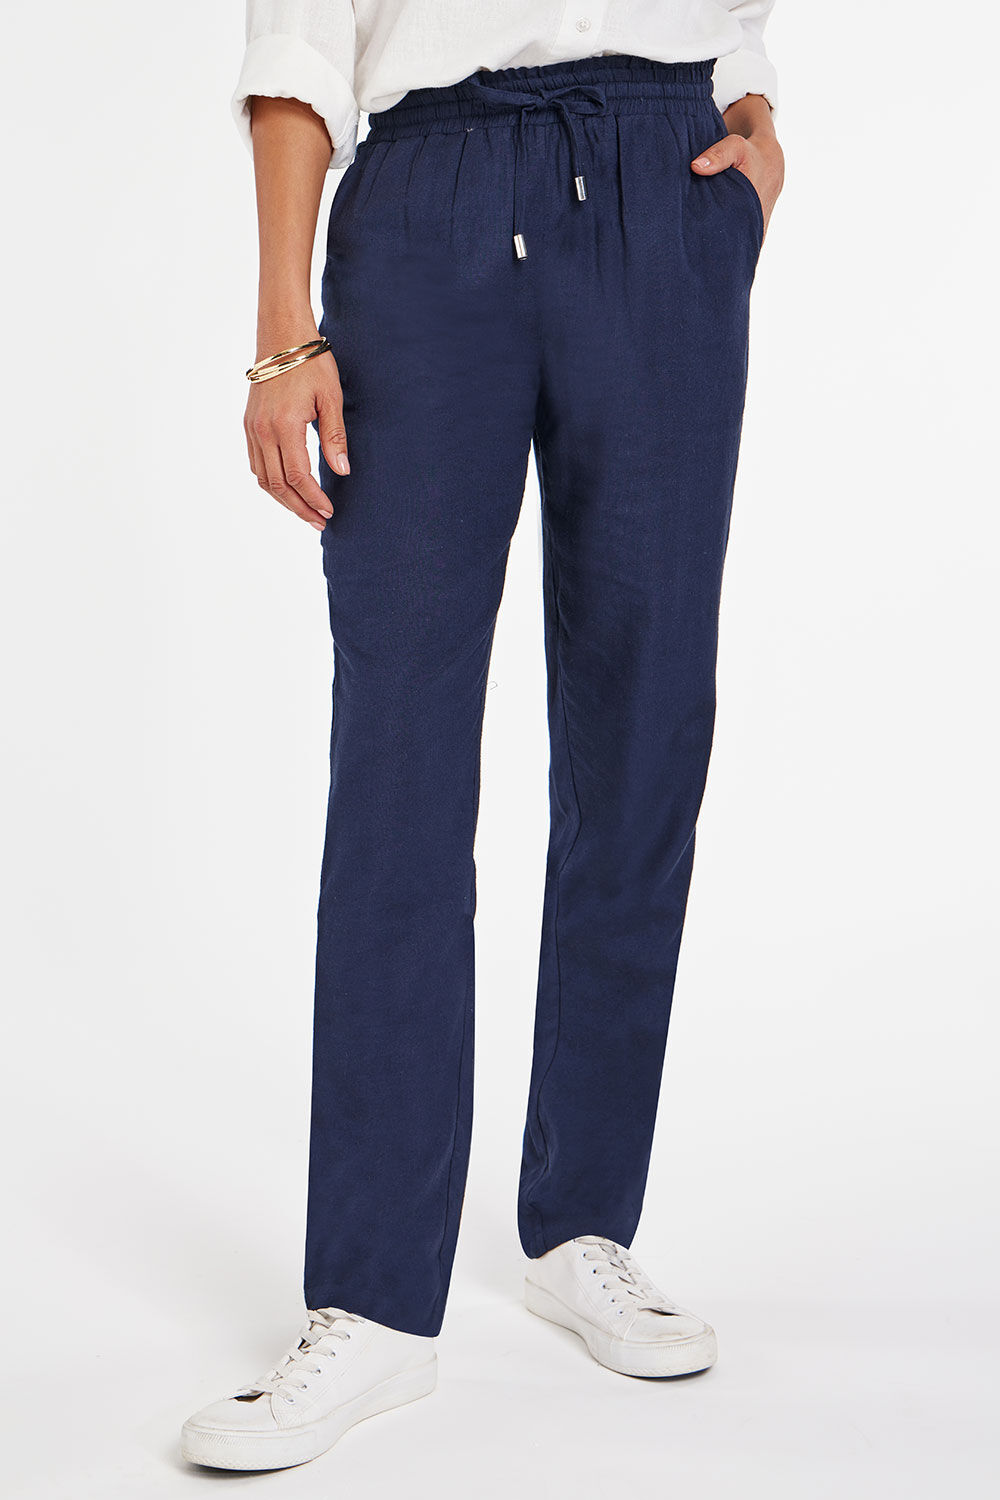 Bonmarche Navy Paperbag Tie Waist Tapered Linen Trousers, Size: 16